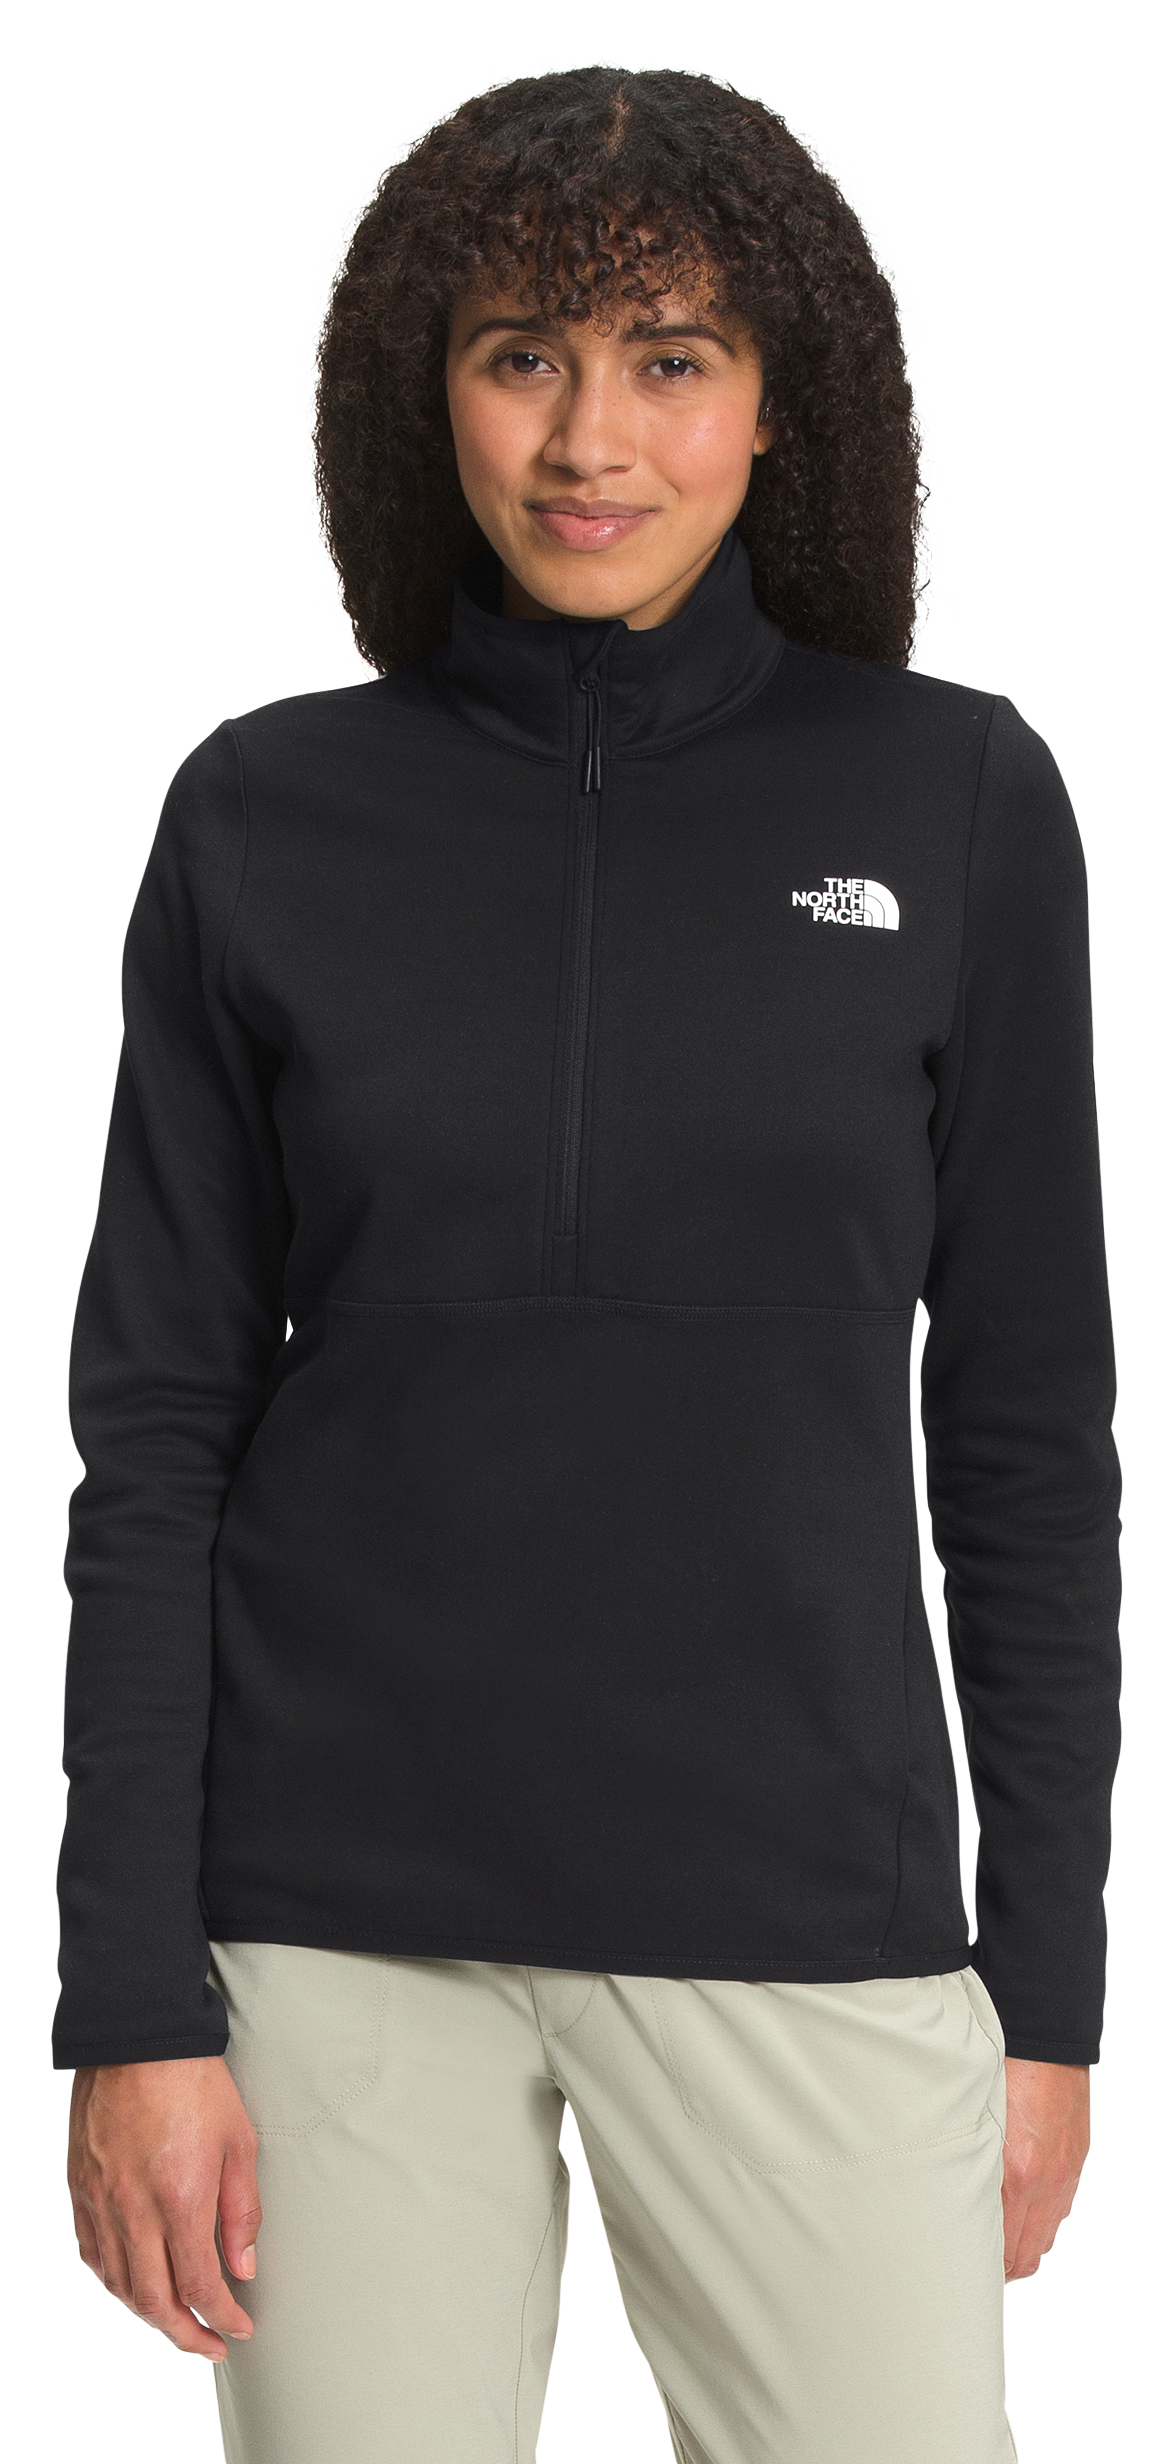 The North Face Canyonlands 1/4-Zip Jacket for Ladies